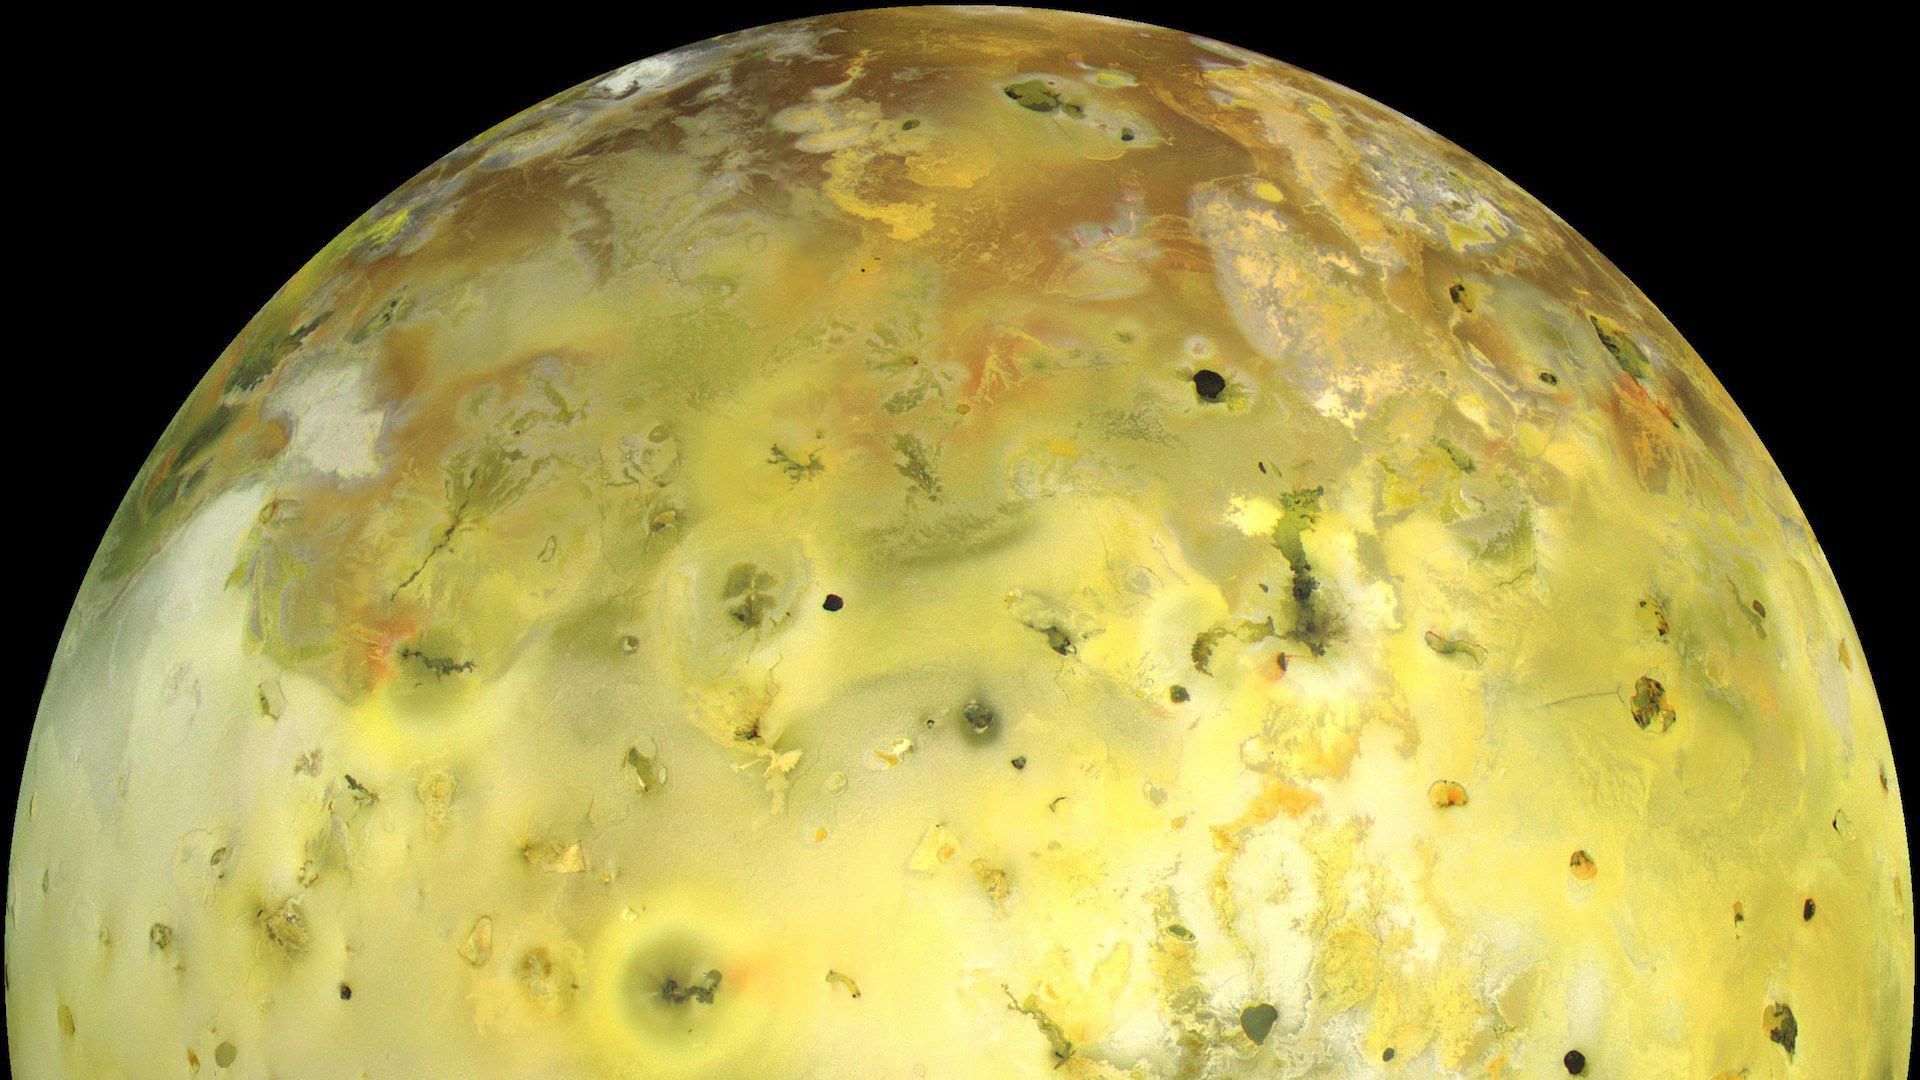 Io seen by the Galileo spacecraft in 1999.